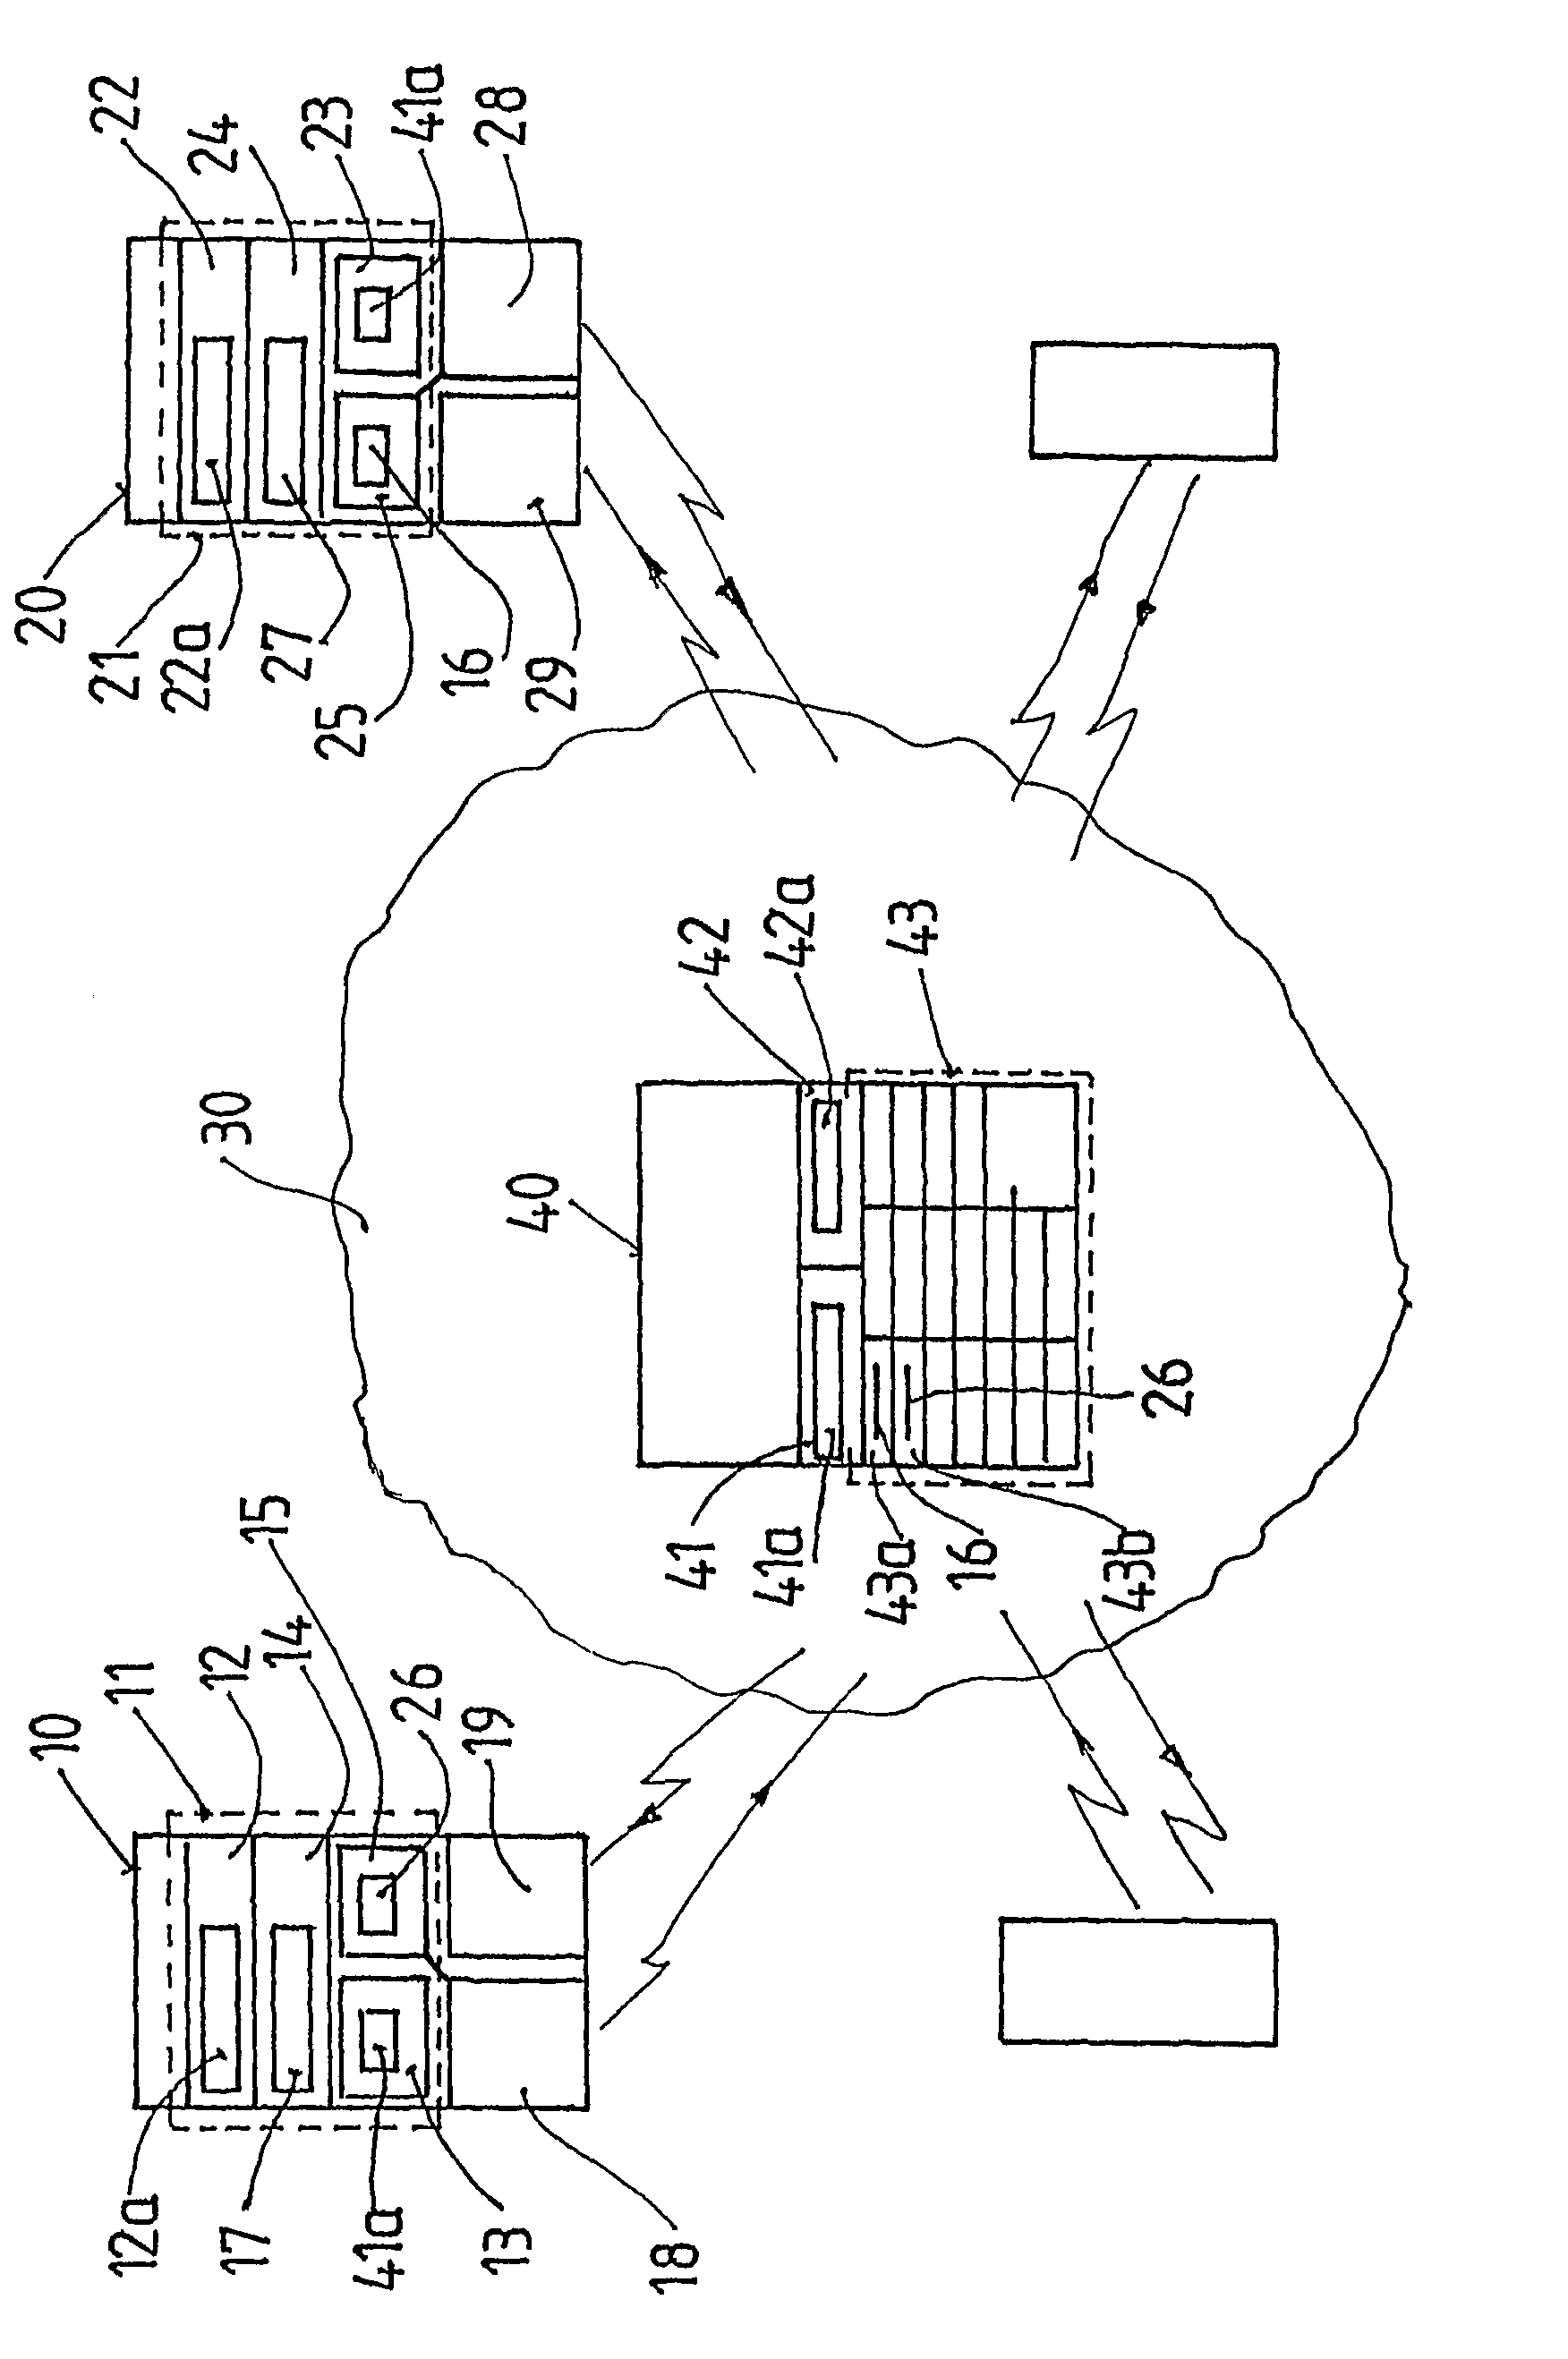 Set of equipment for secure direct information transfer over the internet